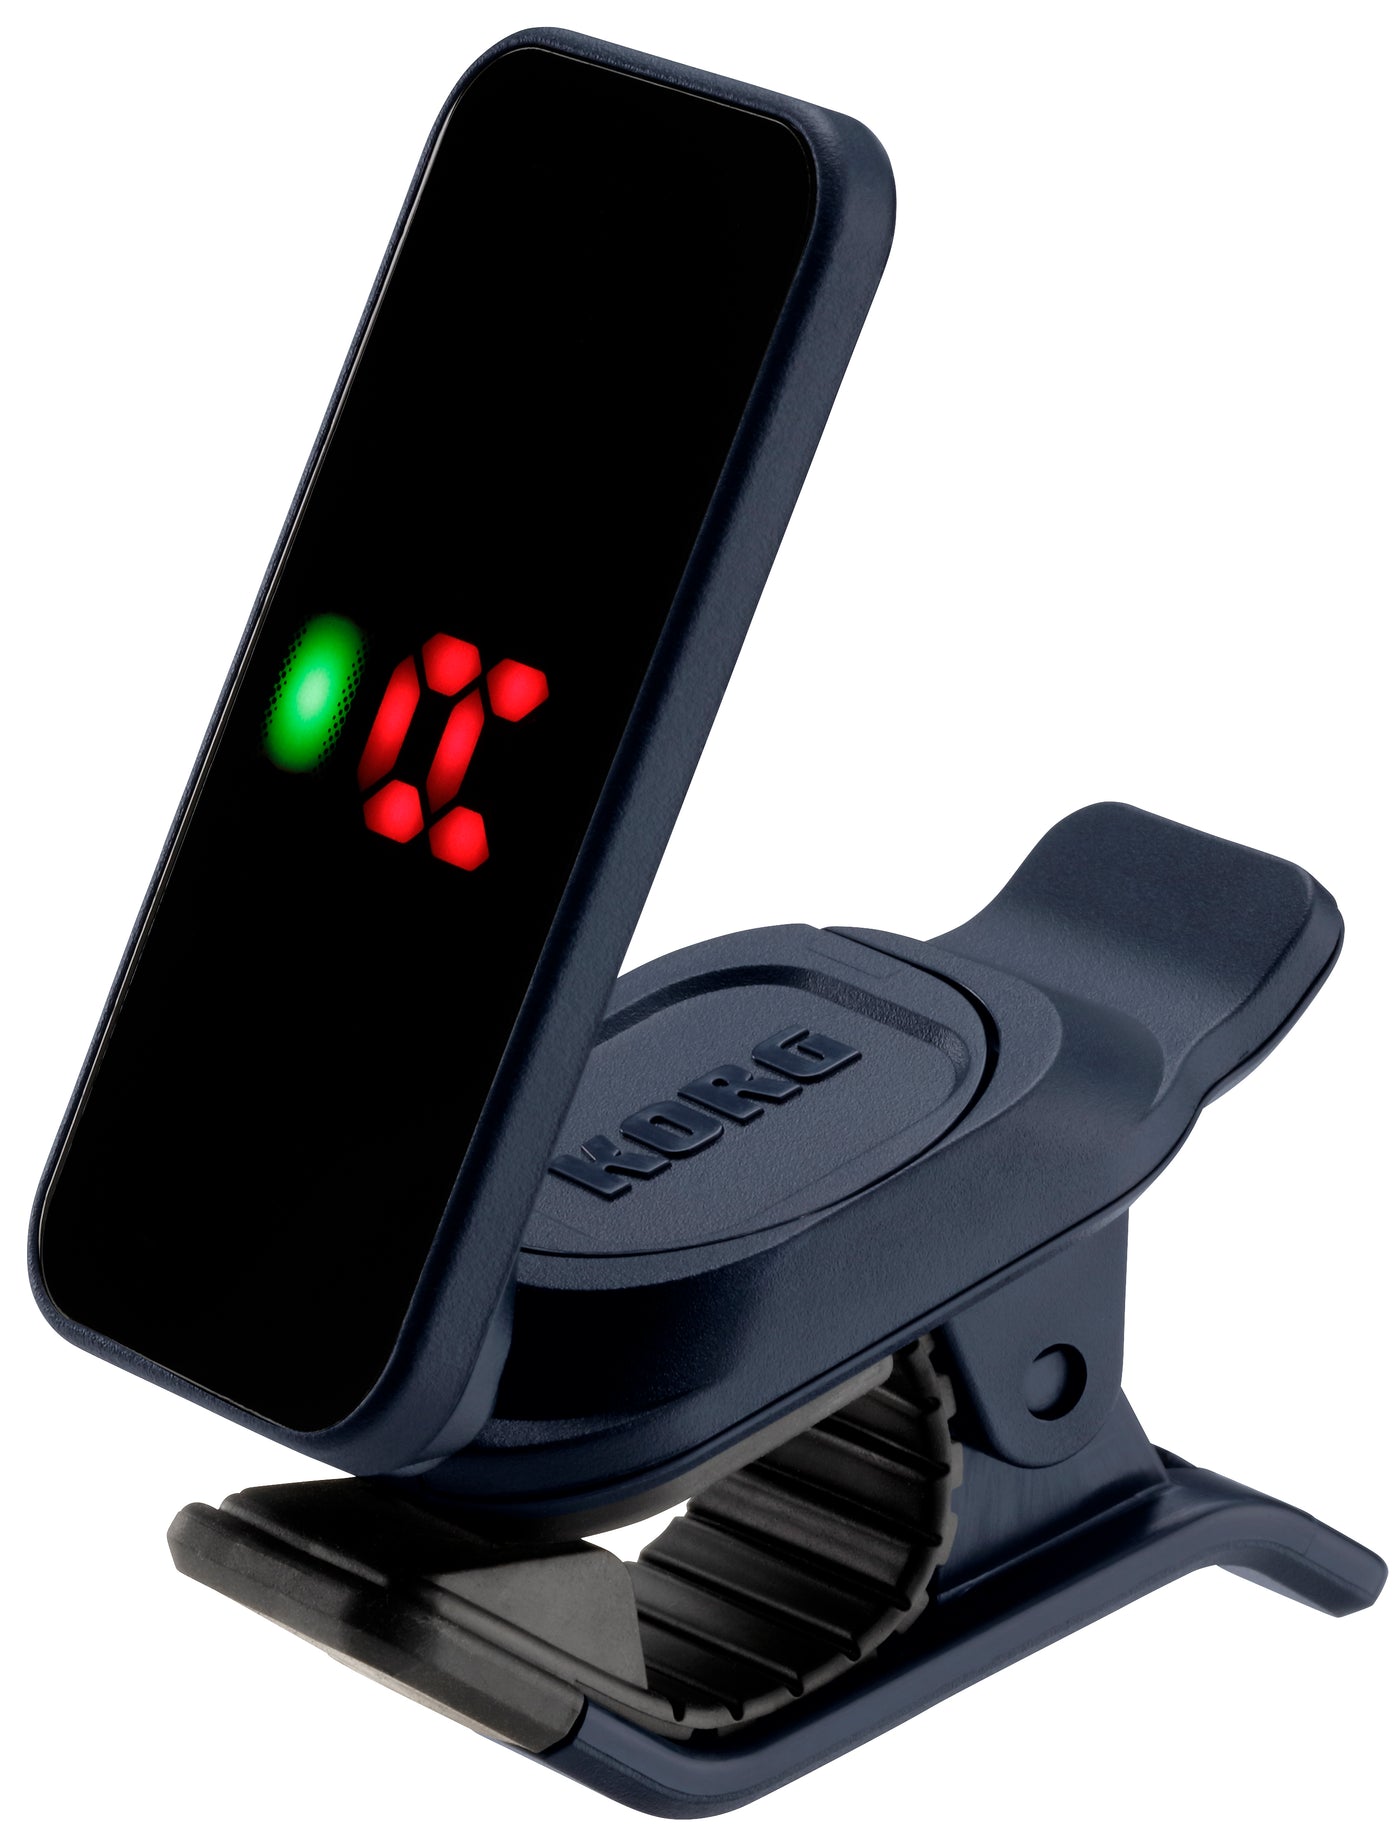 Pitchclip Digital Clip-on Tuner, Colours